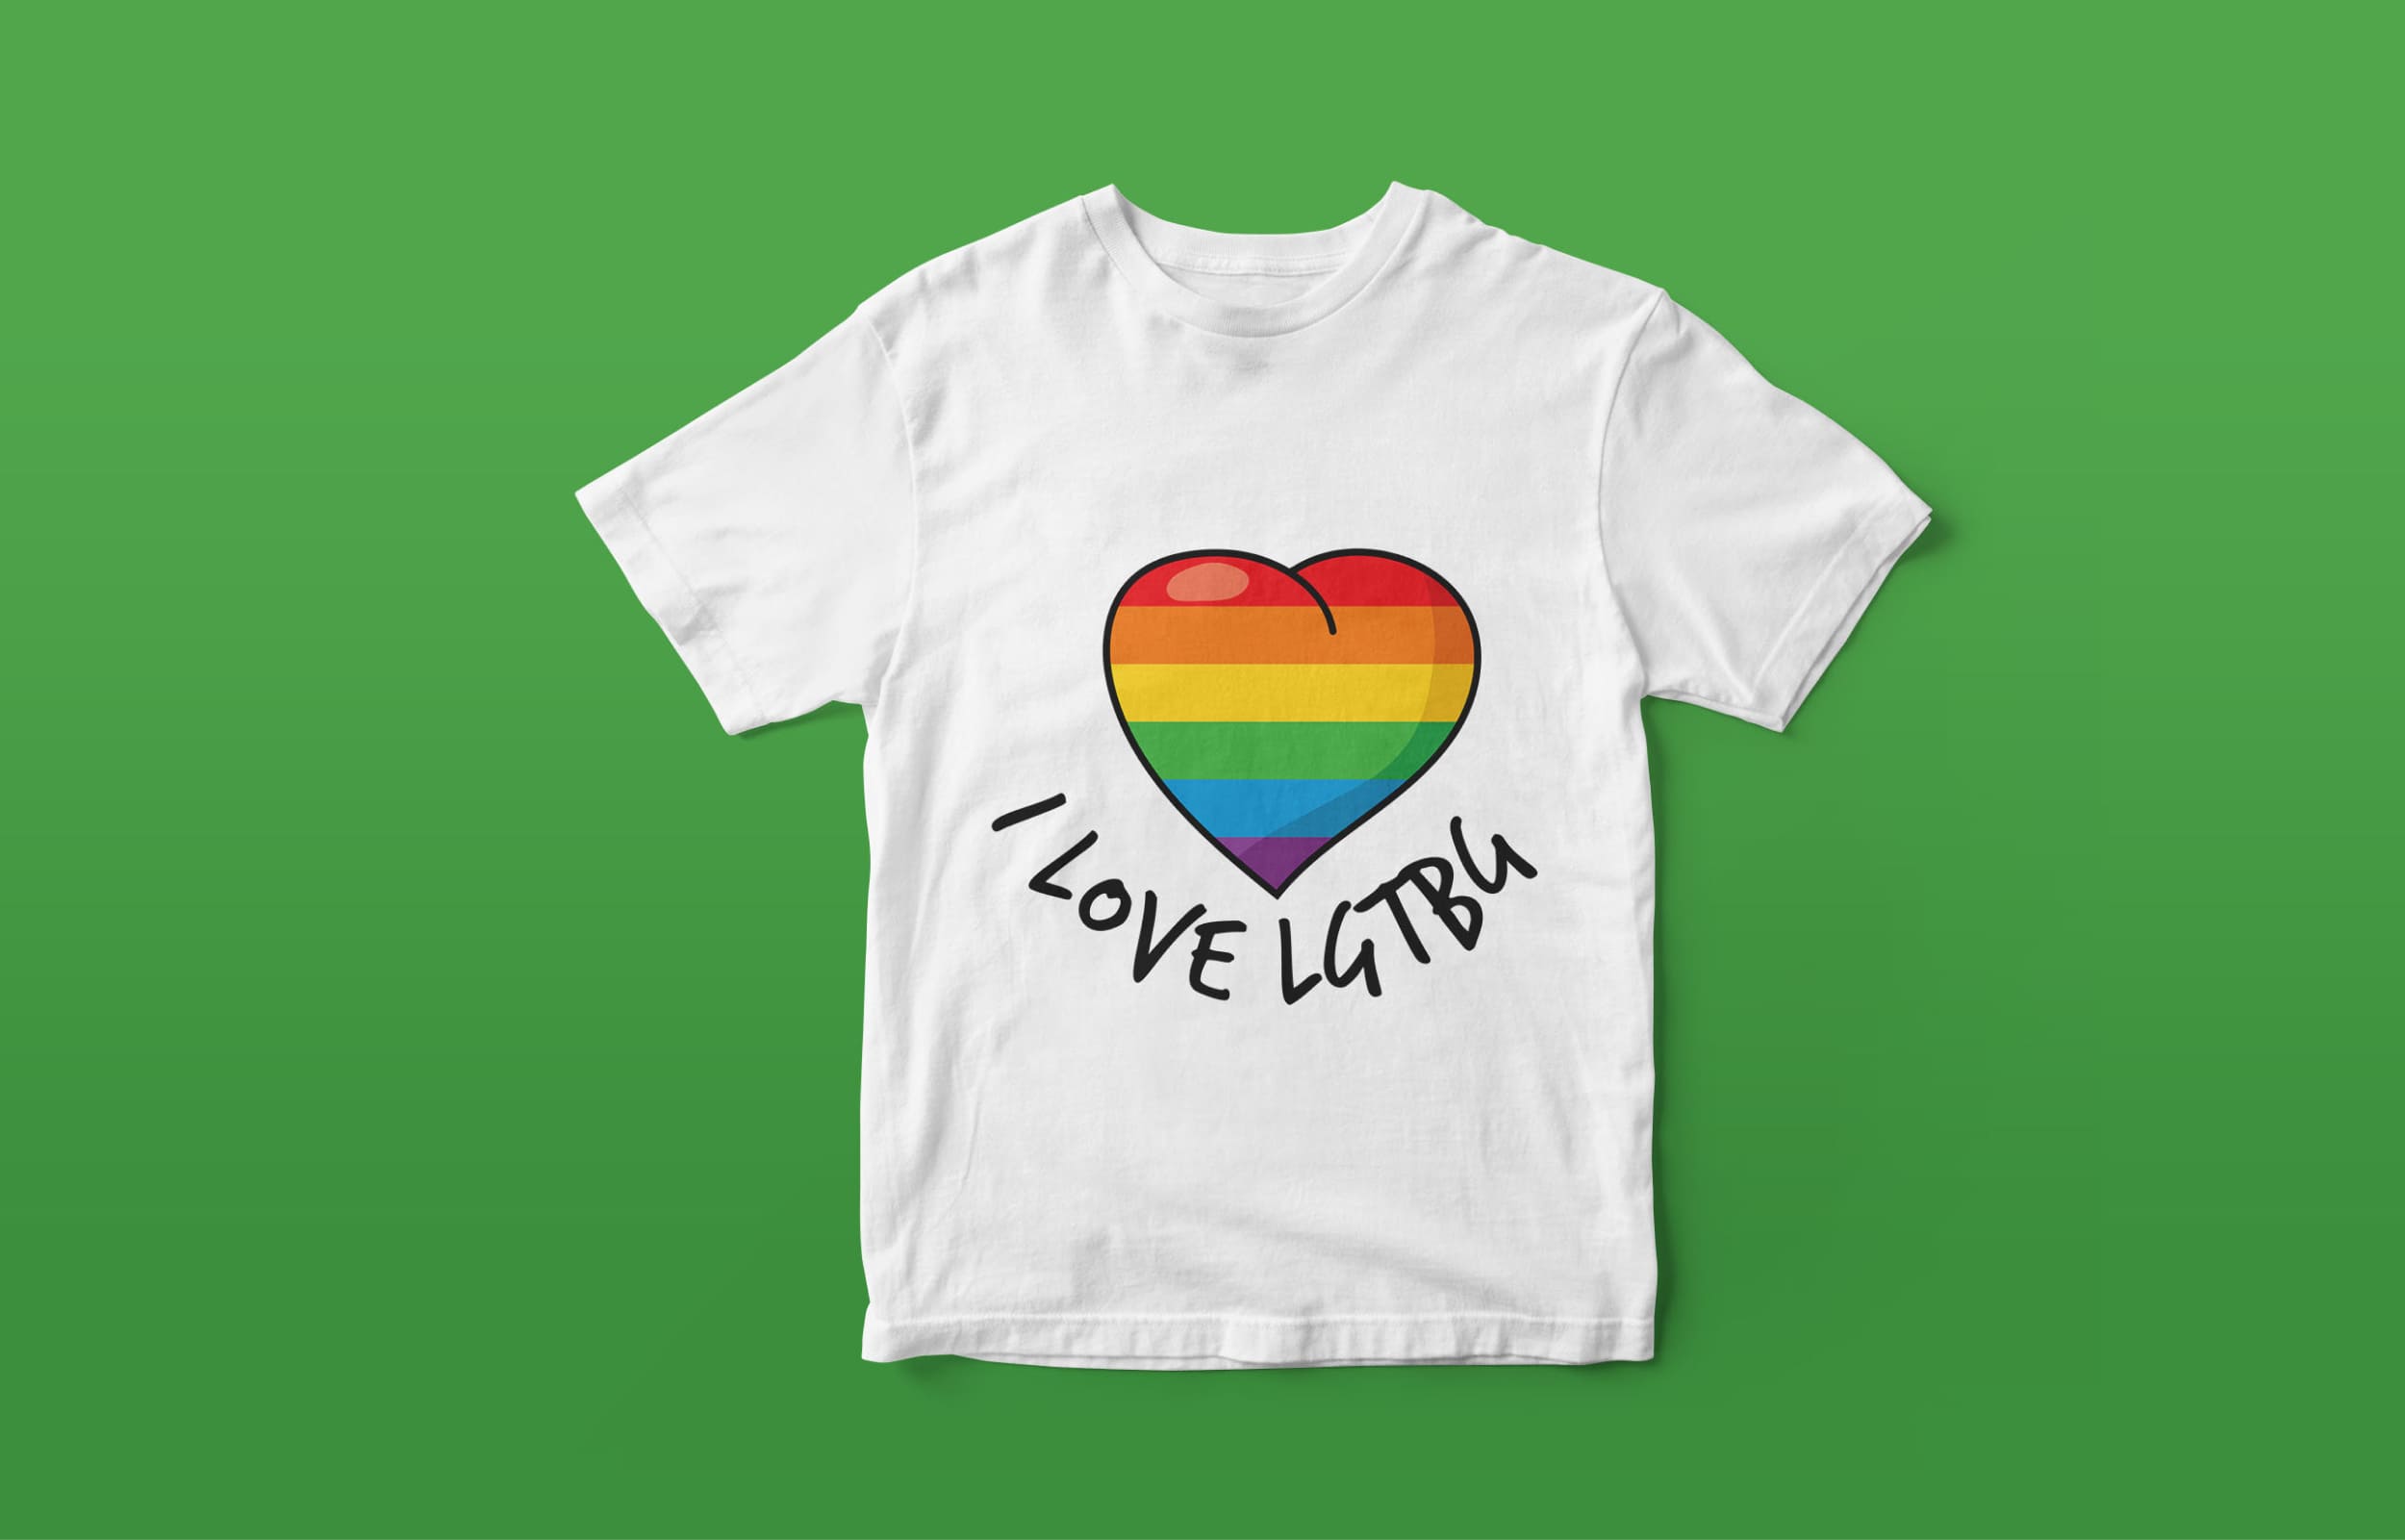 White T-shirt with black "I love LGBTQ" lettering and a heart in LGBT colors on a green background.